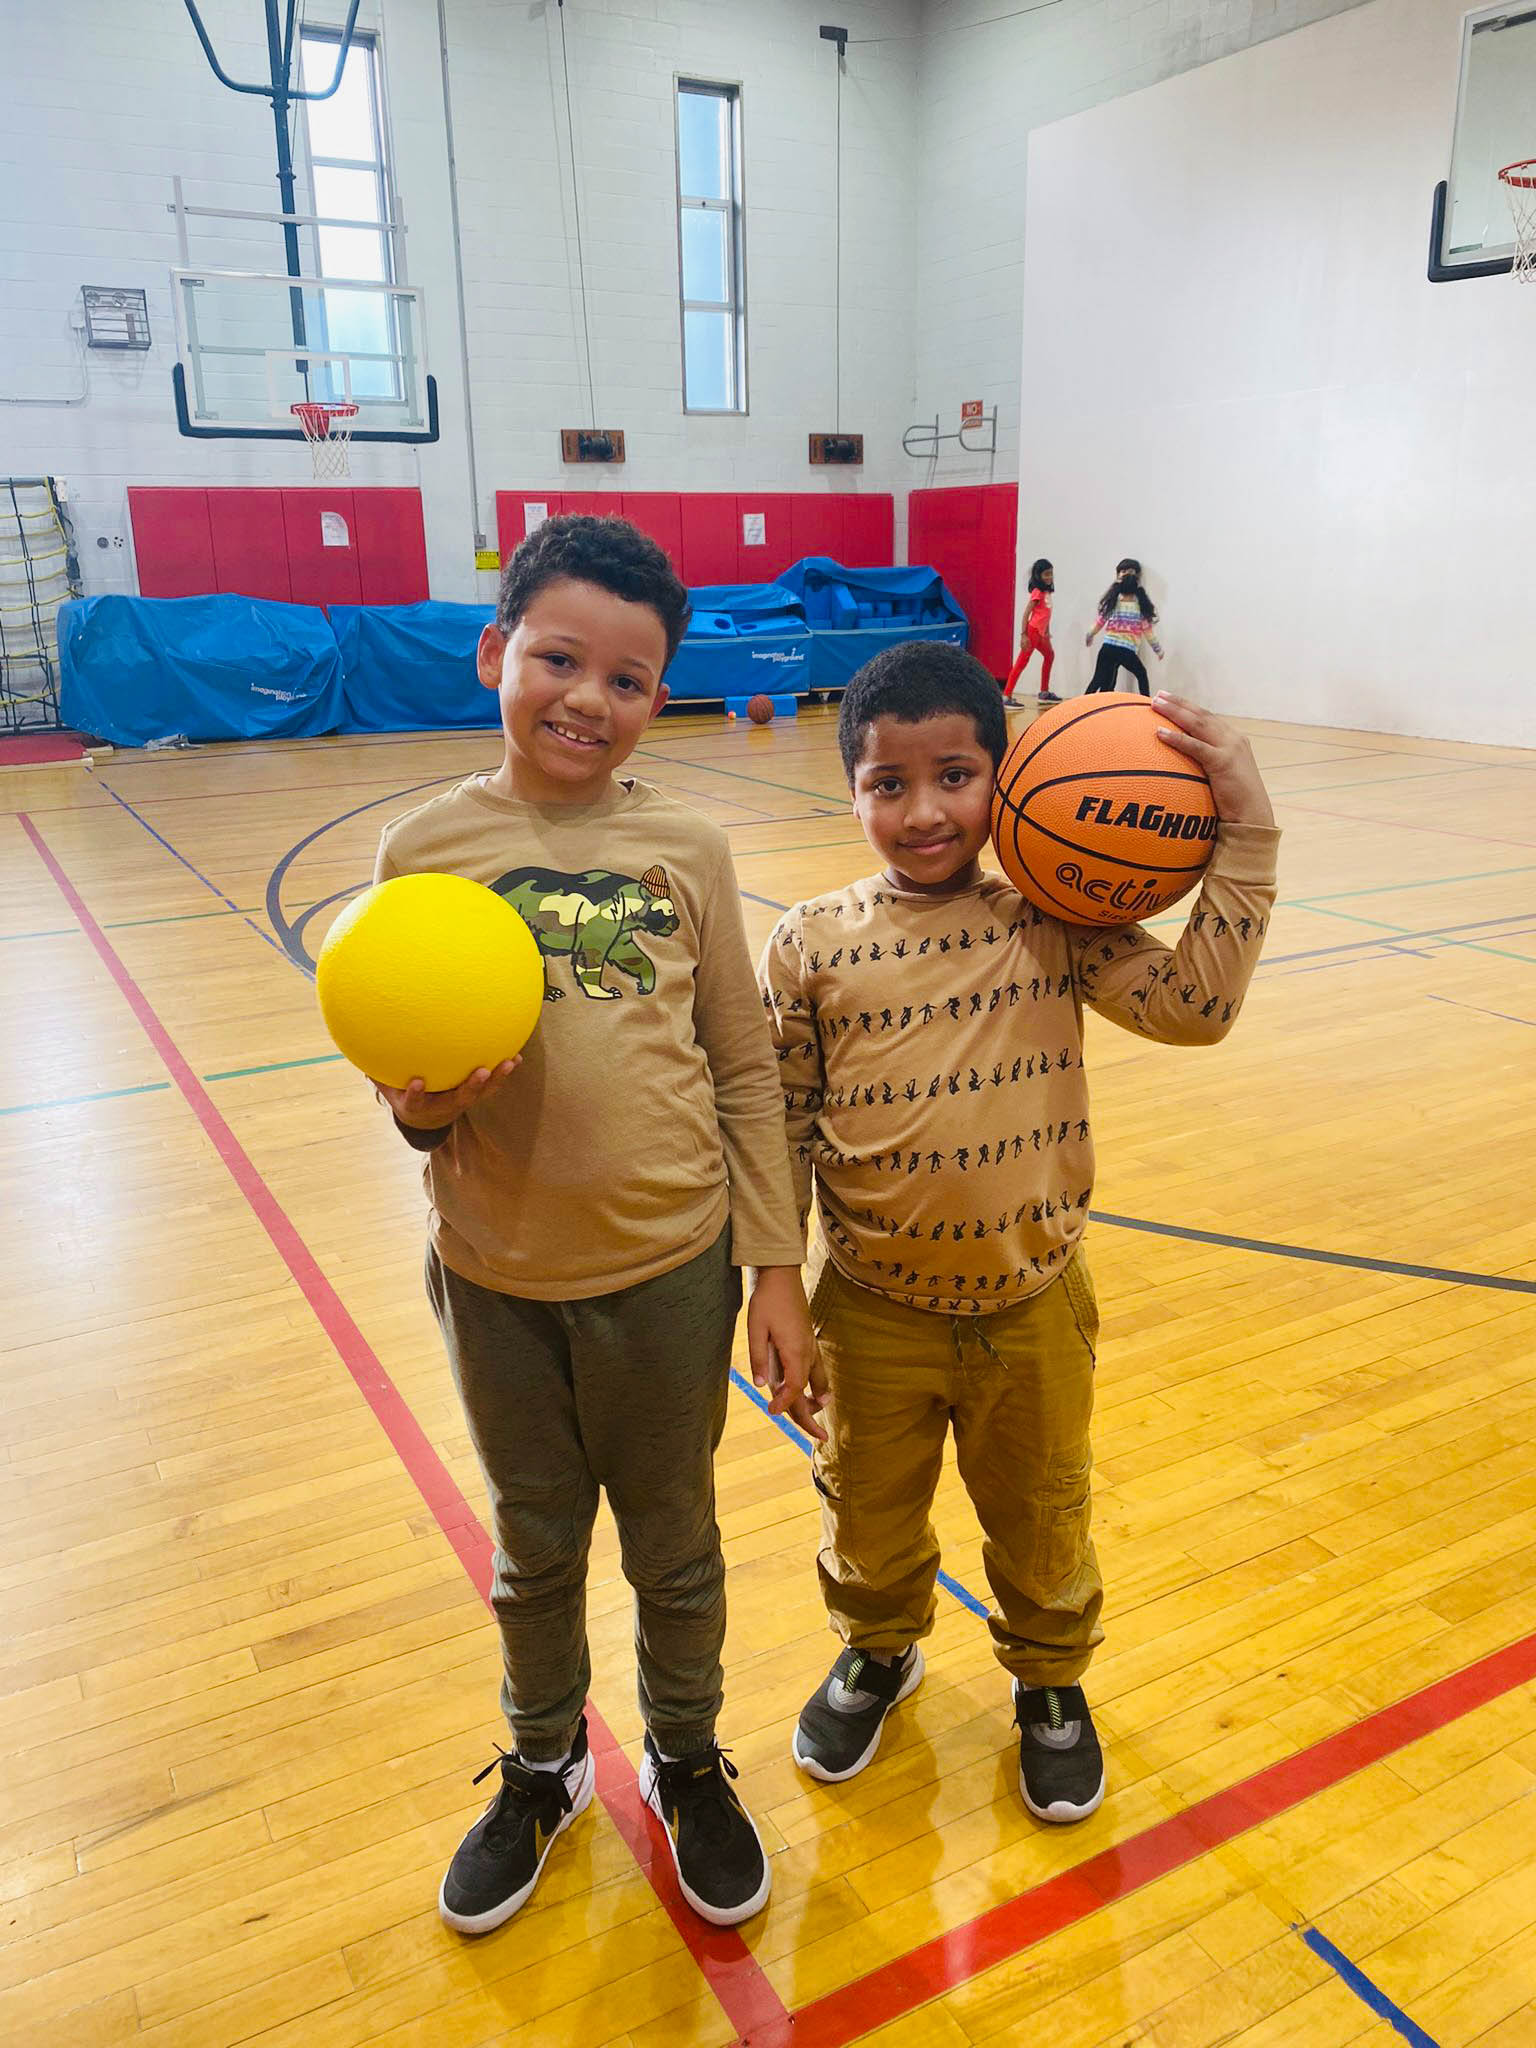 Two boys holding basketballs in a gym.